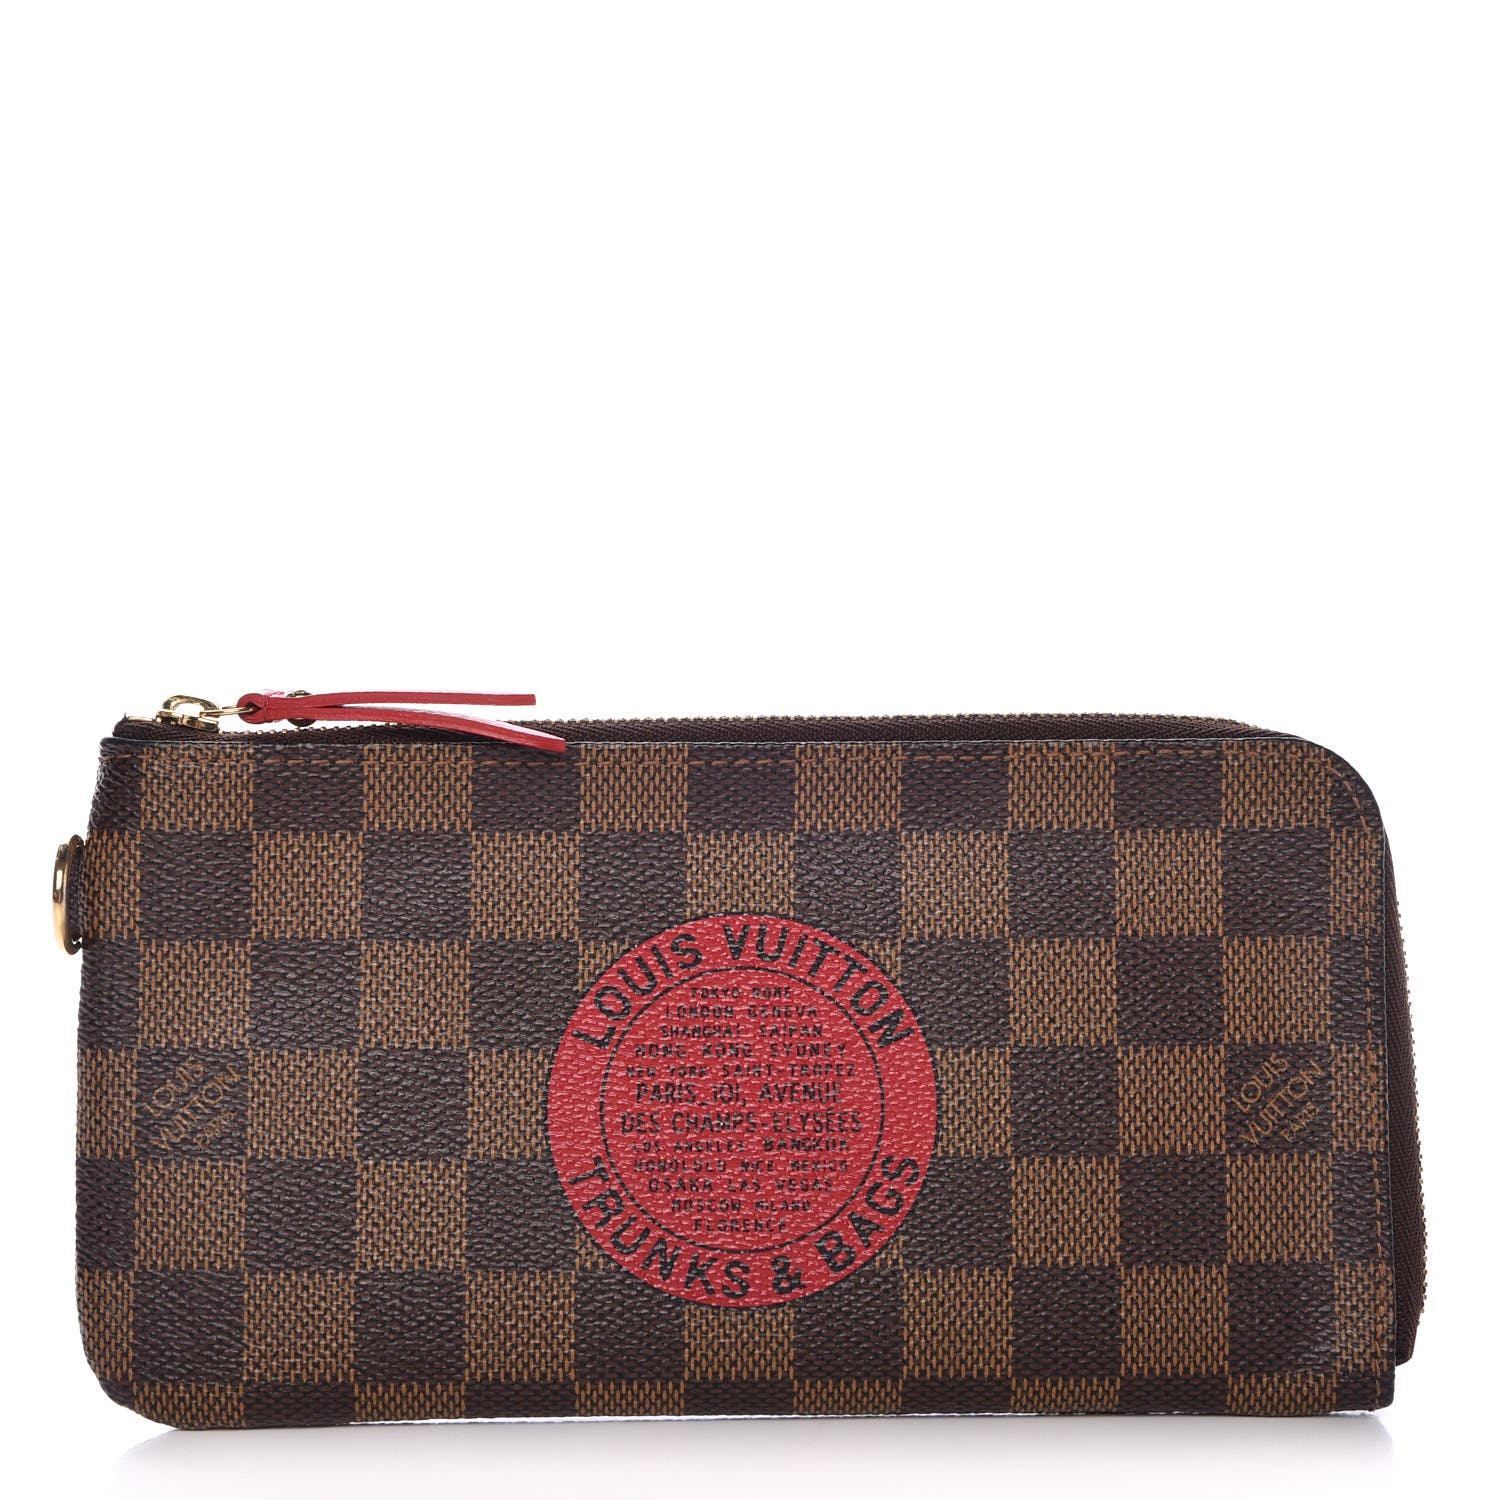 LOUIS VUITTON Damier Ebene Complice Trunks and Bags Wallet Red 316122